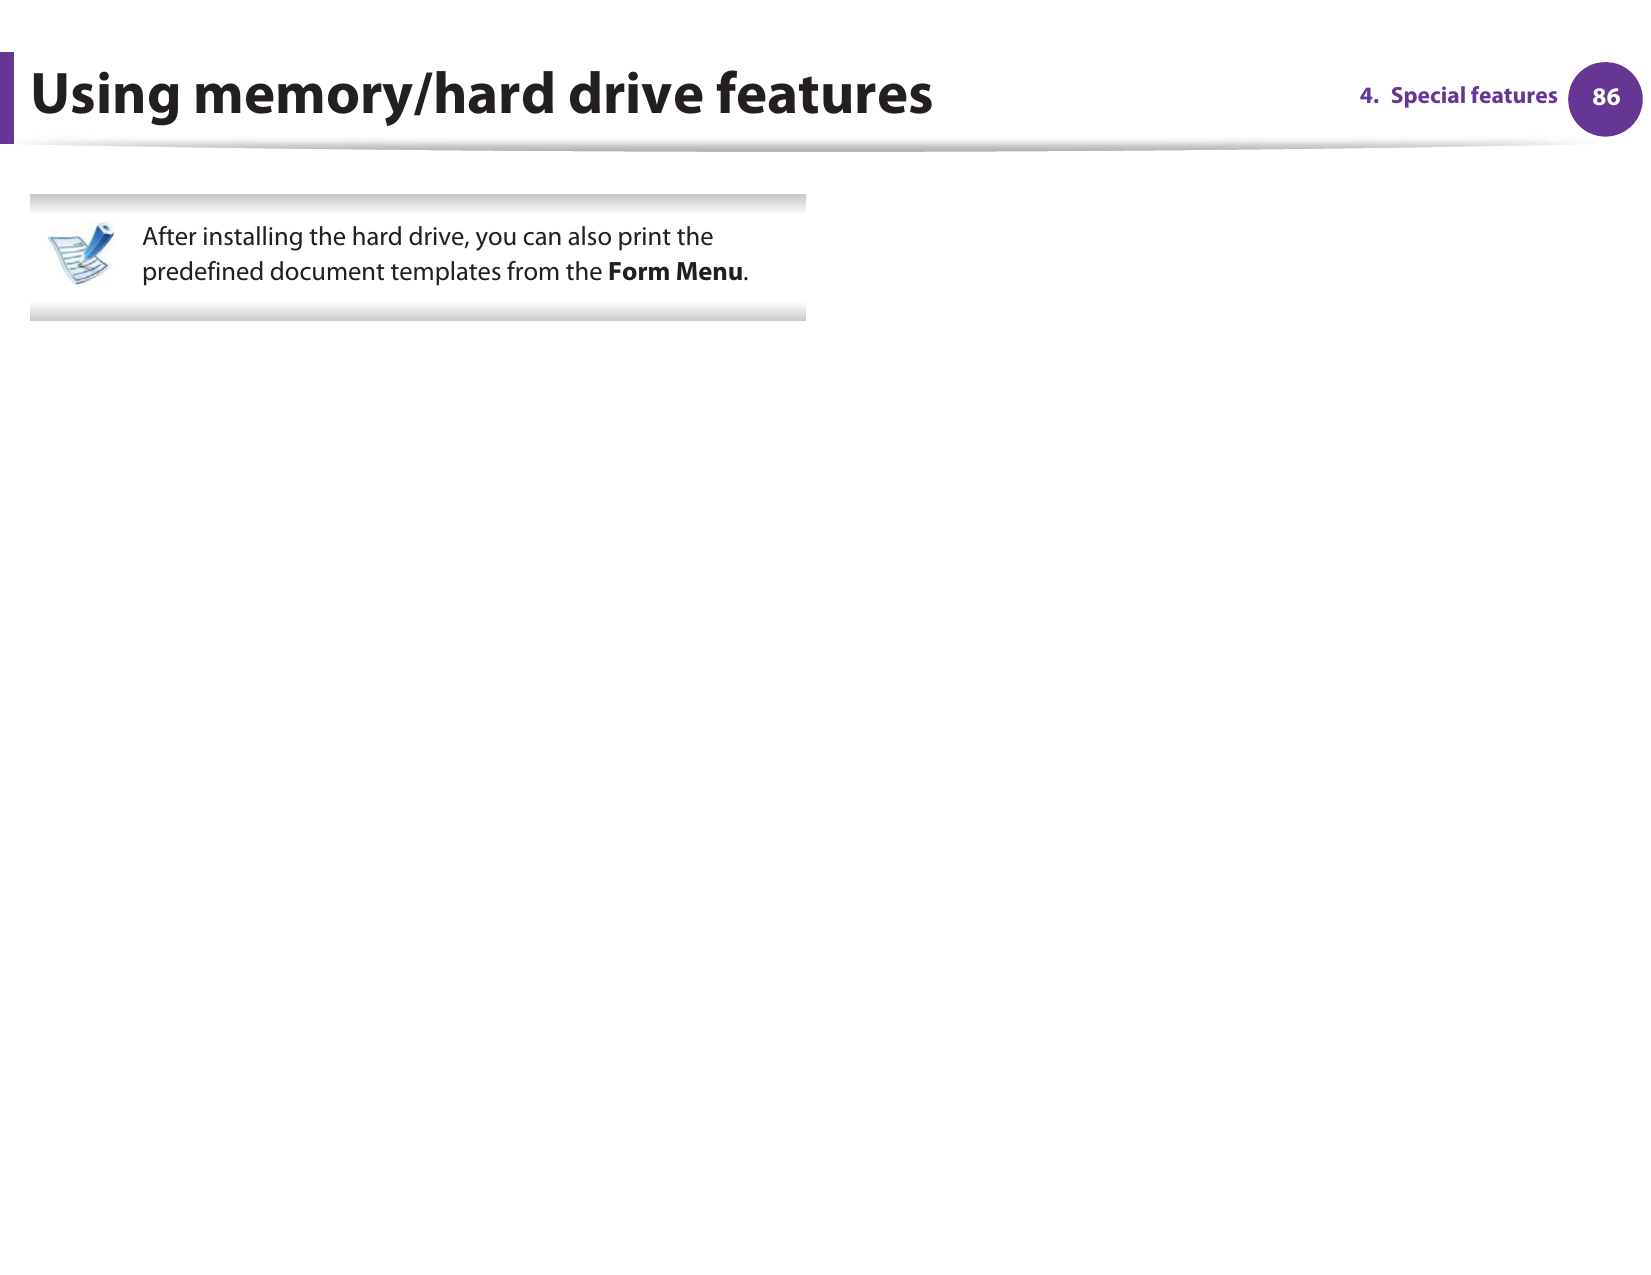 Using memory/hard drive features 864. Special features After installing the hard drive, you can also print the predefined document templates from the Form Menu. 